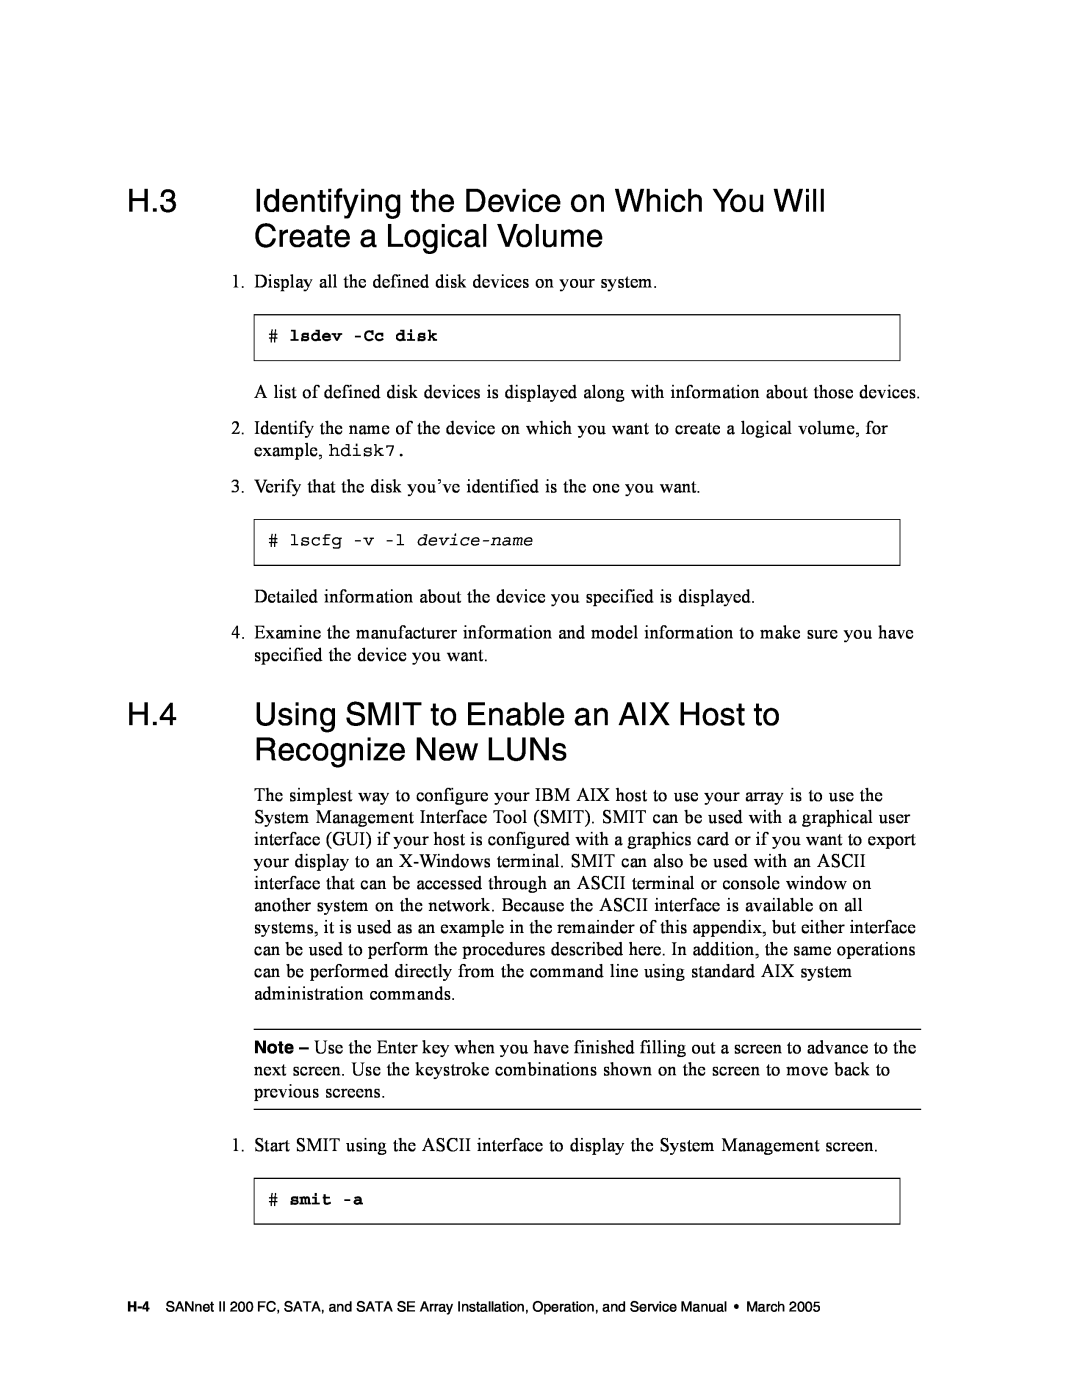 Dot Hill Systems II 200 FC service manual H.3 Identifying the Device on Which You Will Create a Logical Volume 